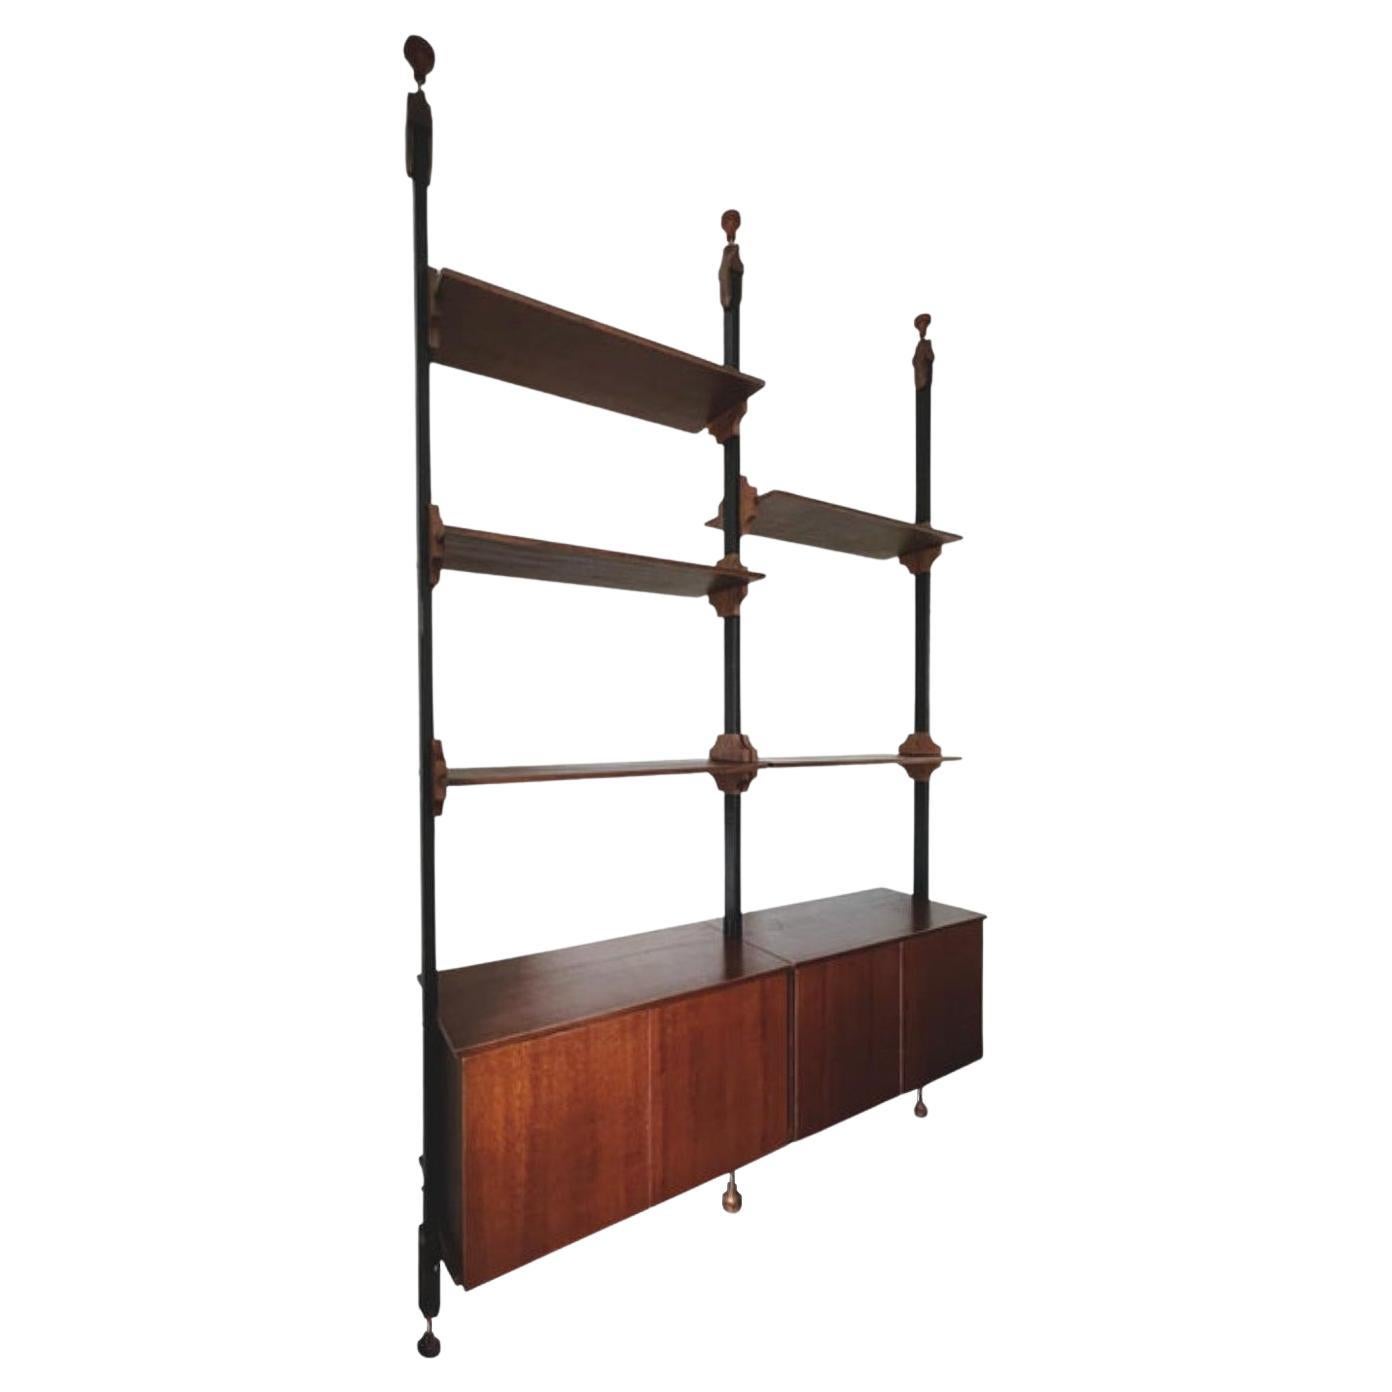 Italian Floor to Ceiling Shelving Unit, Two Bays, Second Half 20th Century